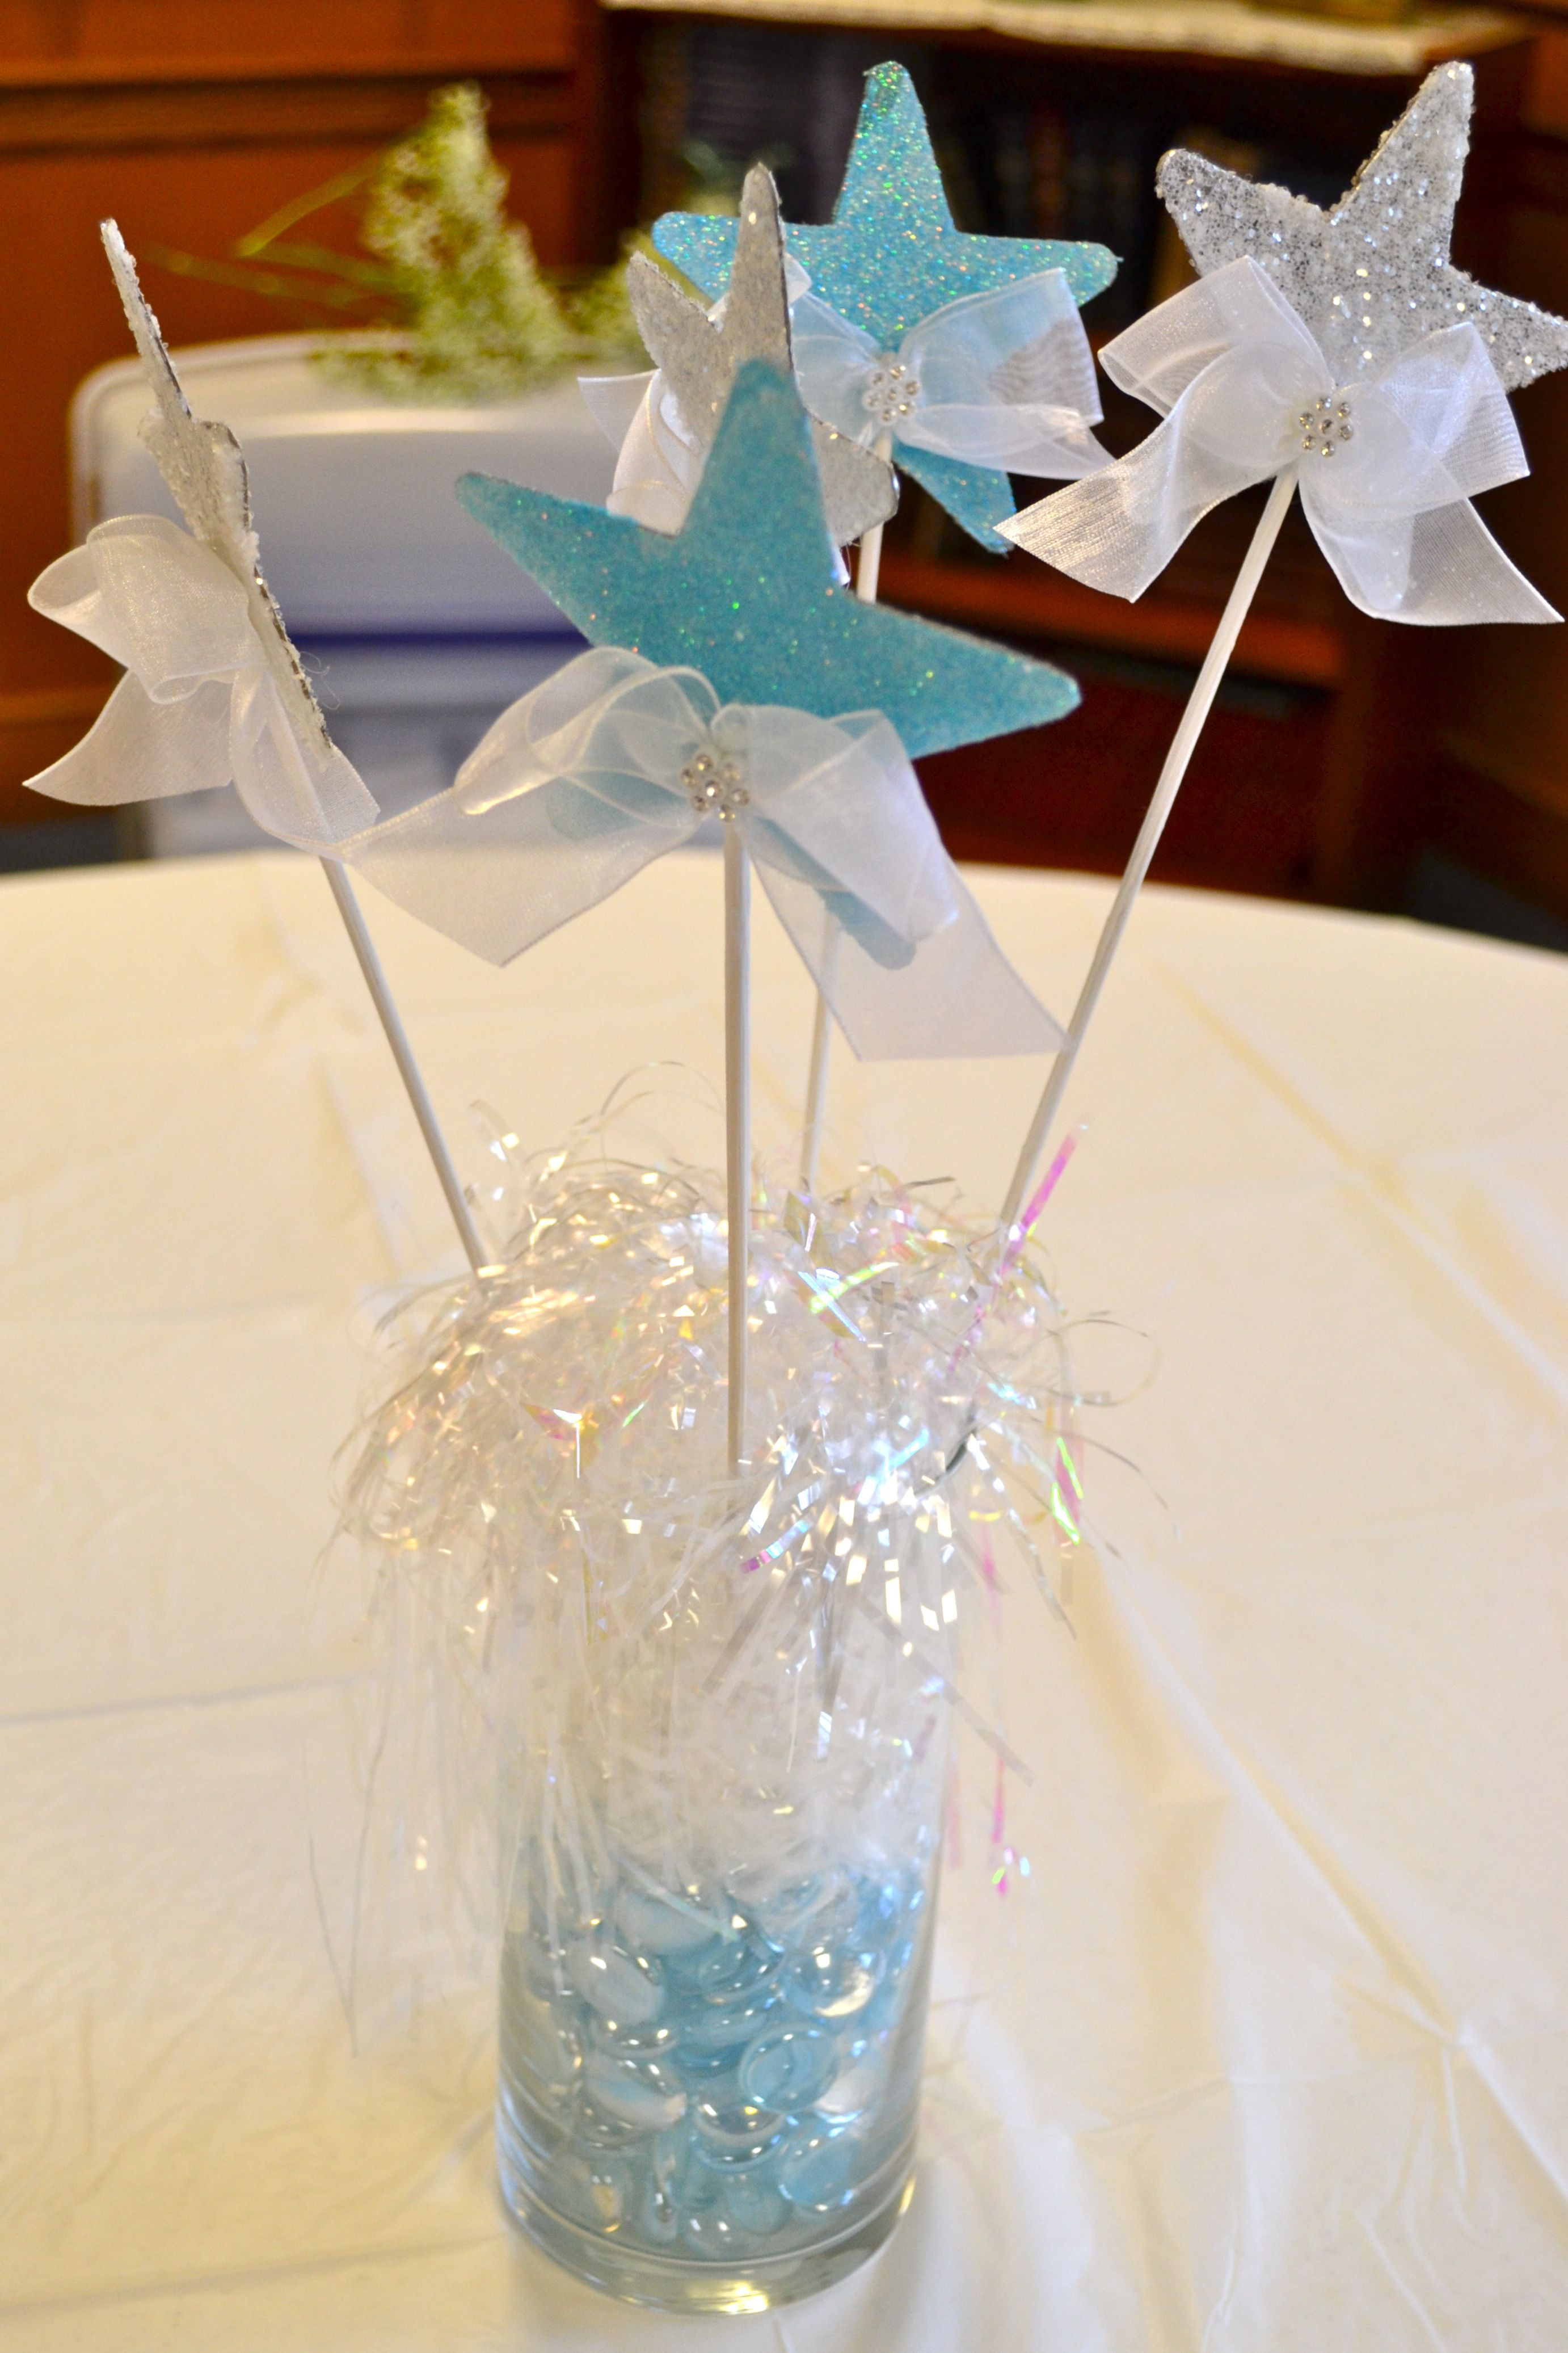 13 attractive Vase Fillers Sticks 2024 free download vase fillers sticks of little star centerpieces empty glass vase filled with silver with regard to little star centerpieces empty glass vase filled with silver white and blue shiny stuff att